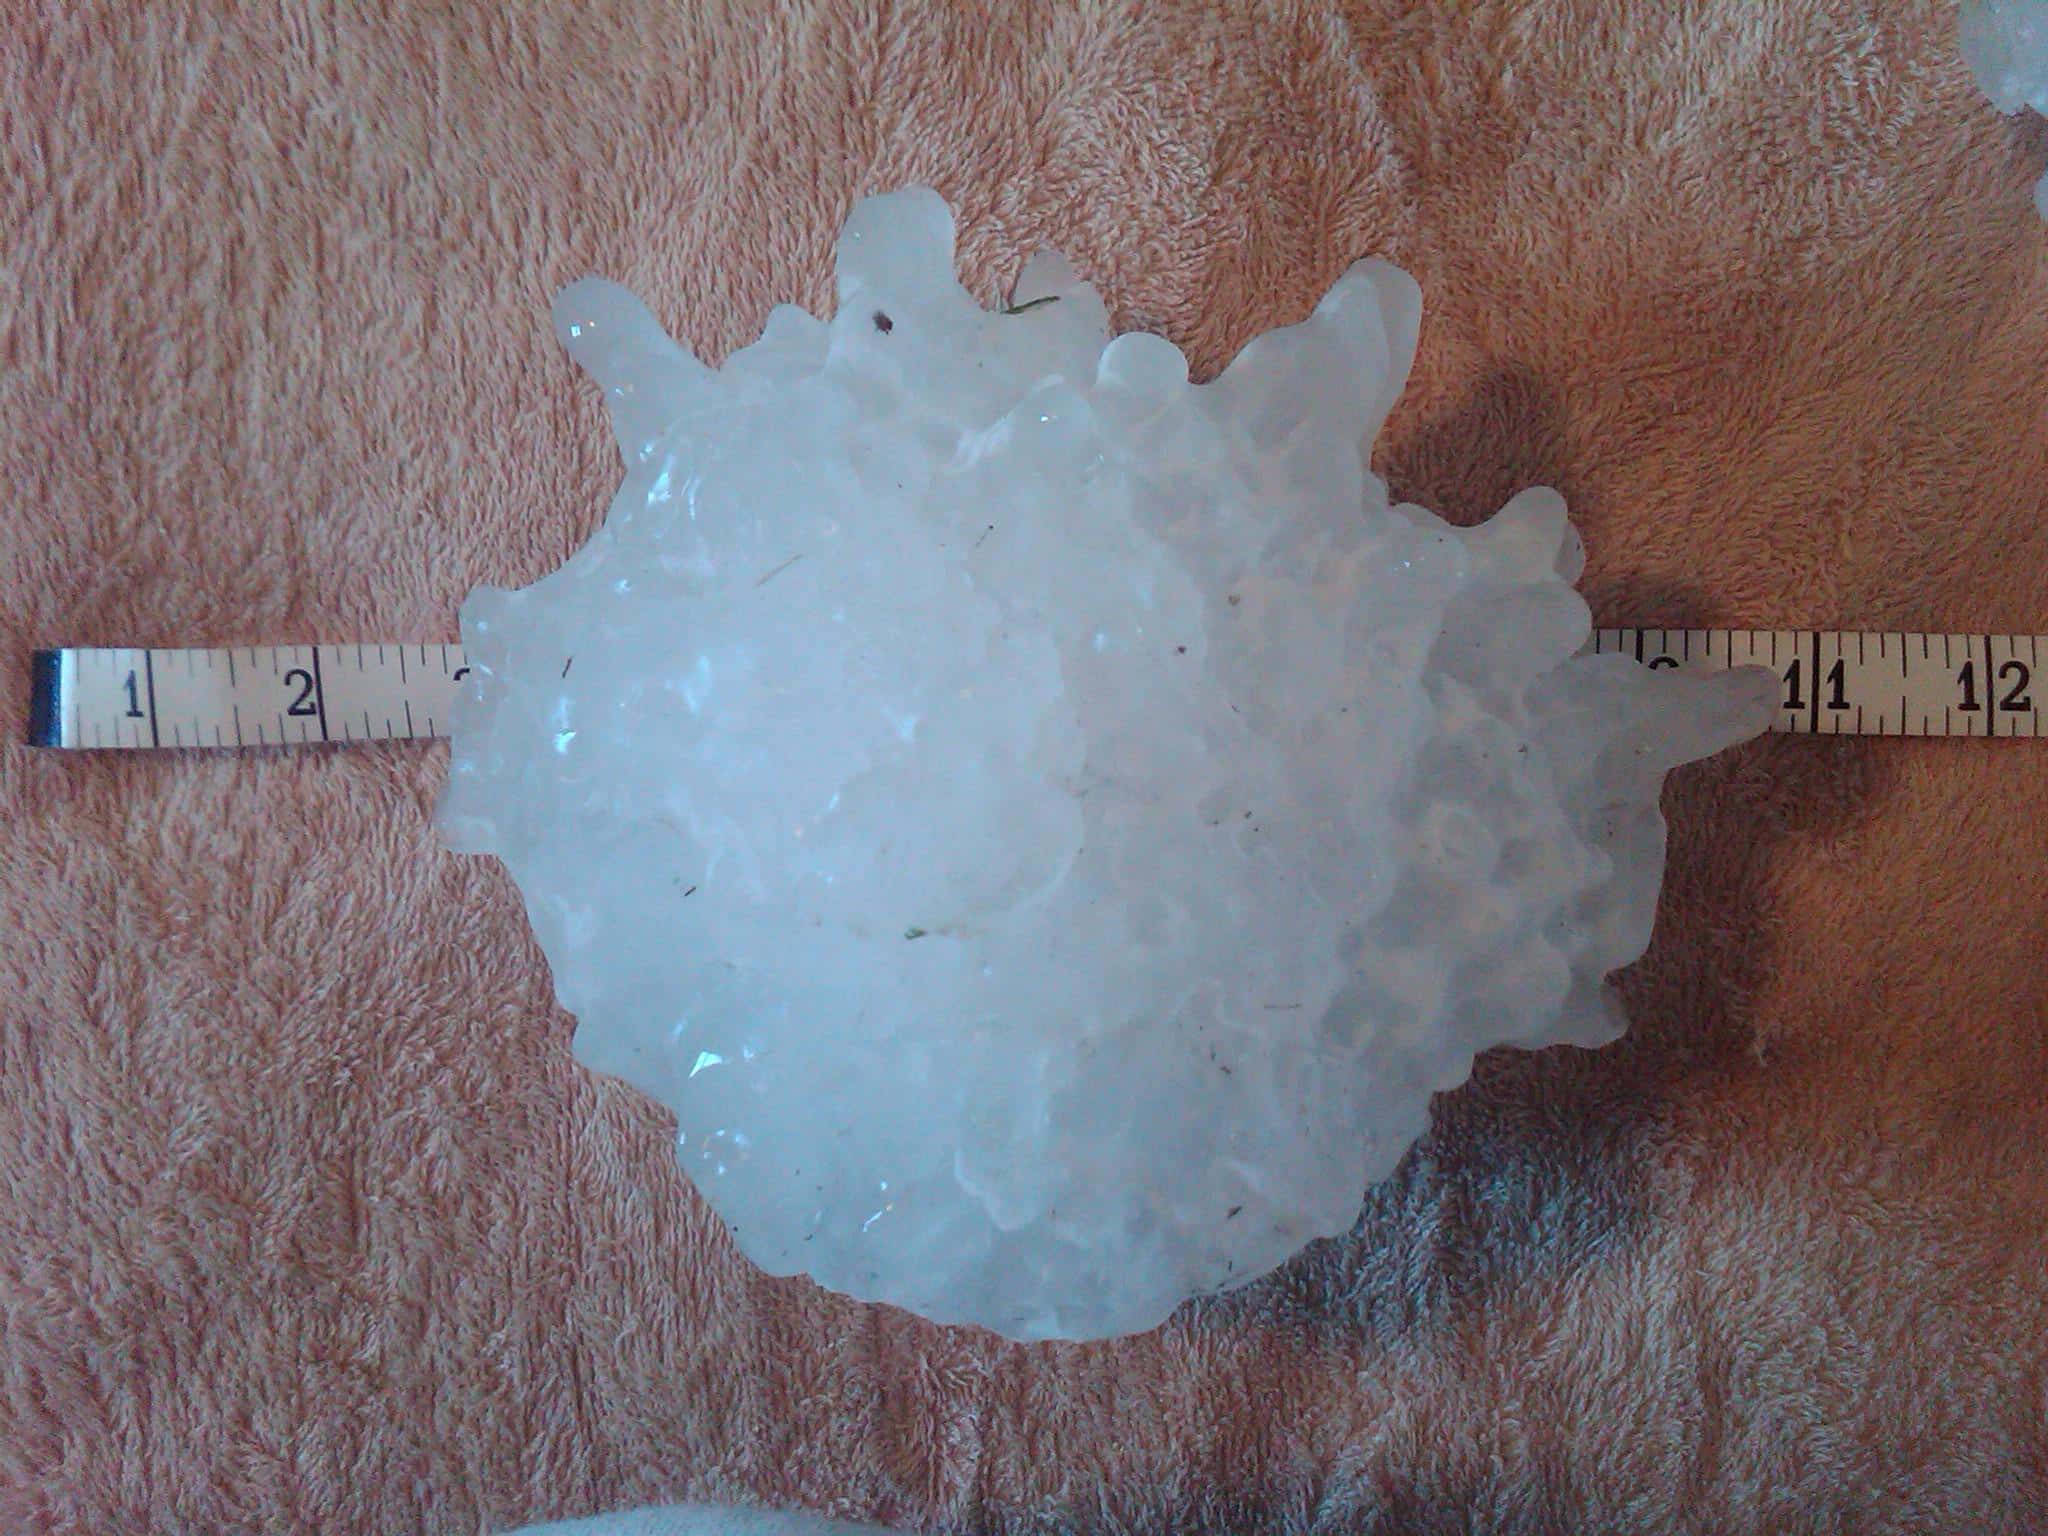 A record-setting hailstone that fell in Vivian, South Dakota on July 23, 2010. The hailstone broke the United States records for largest hailstone by diameter (7.9 inches) and weight (1 pound 15 ounces).